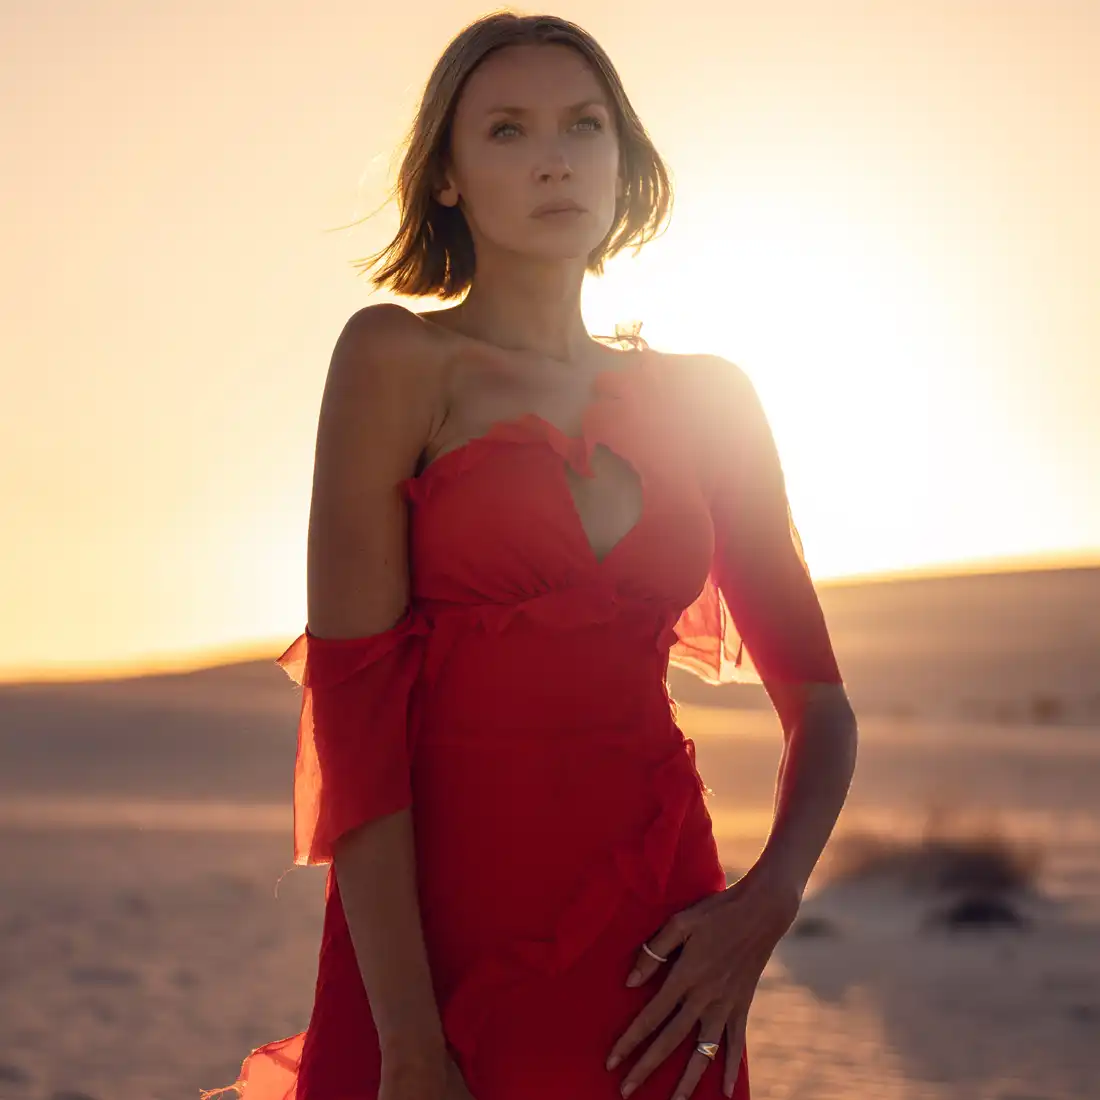 woman in red dress staning in desert | chin filler in miami